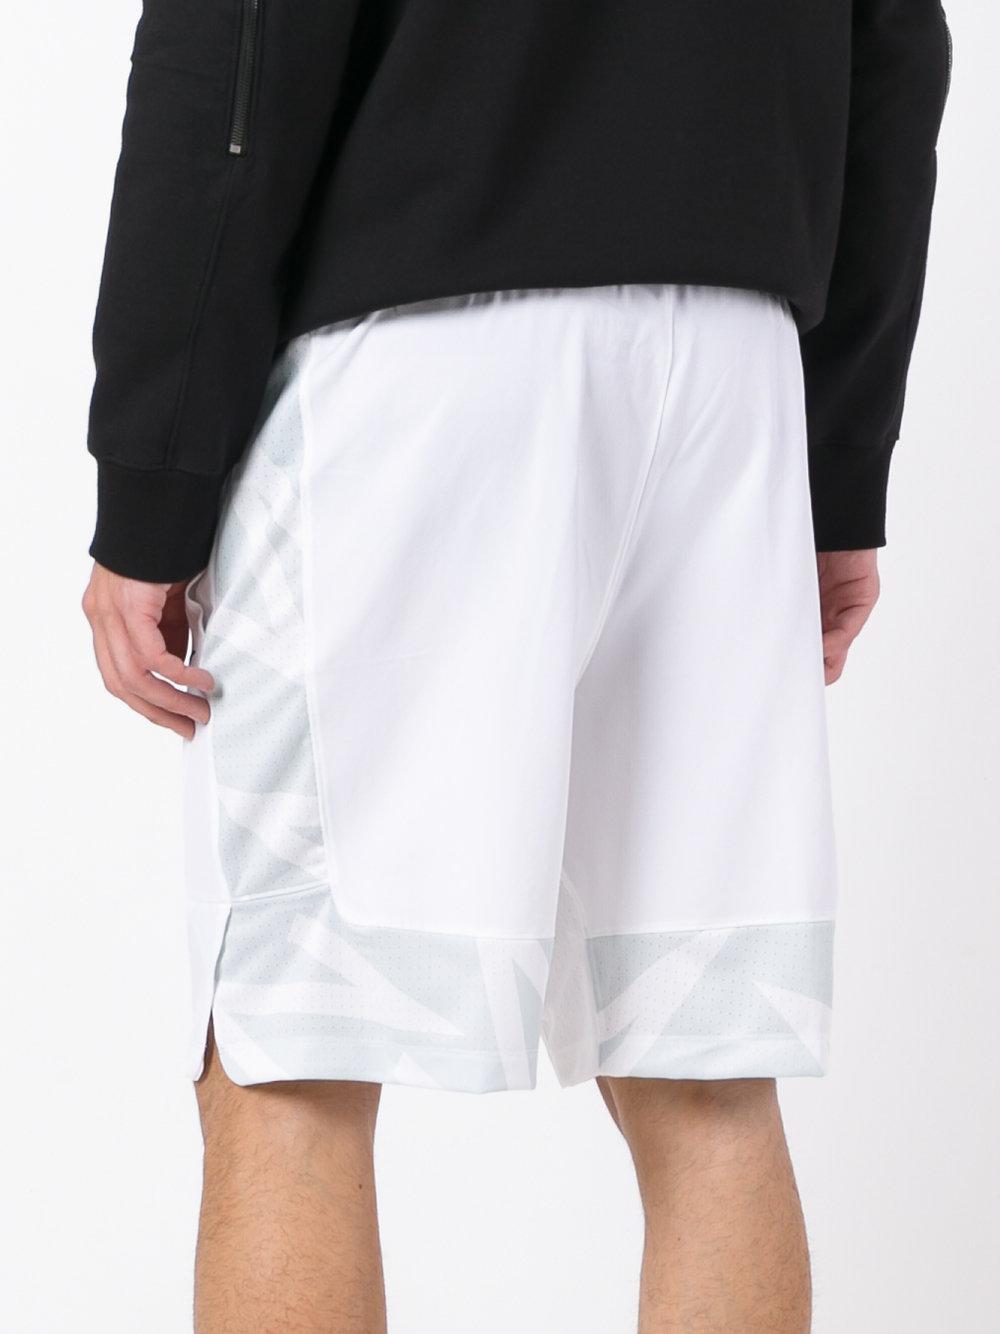 Nike Synthetic Boxing-style Shorts in White for Men - Lyst